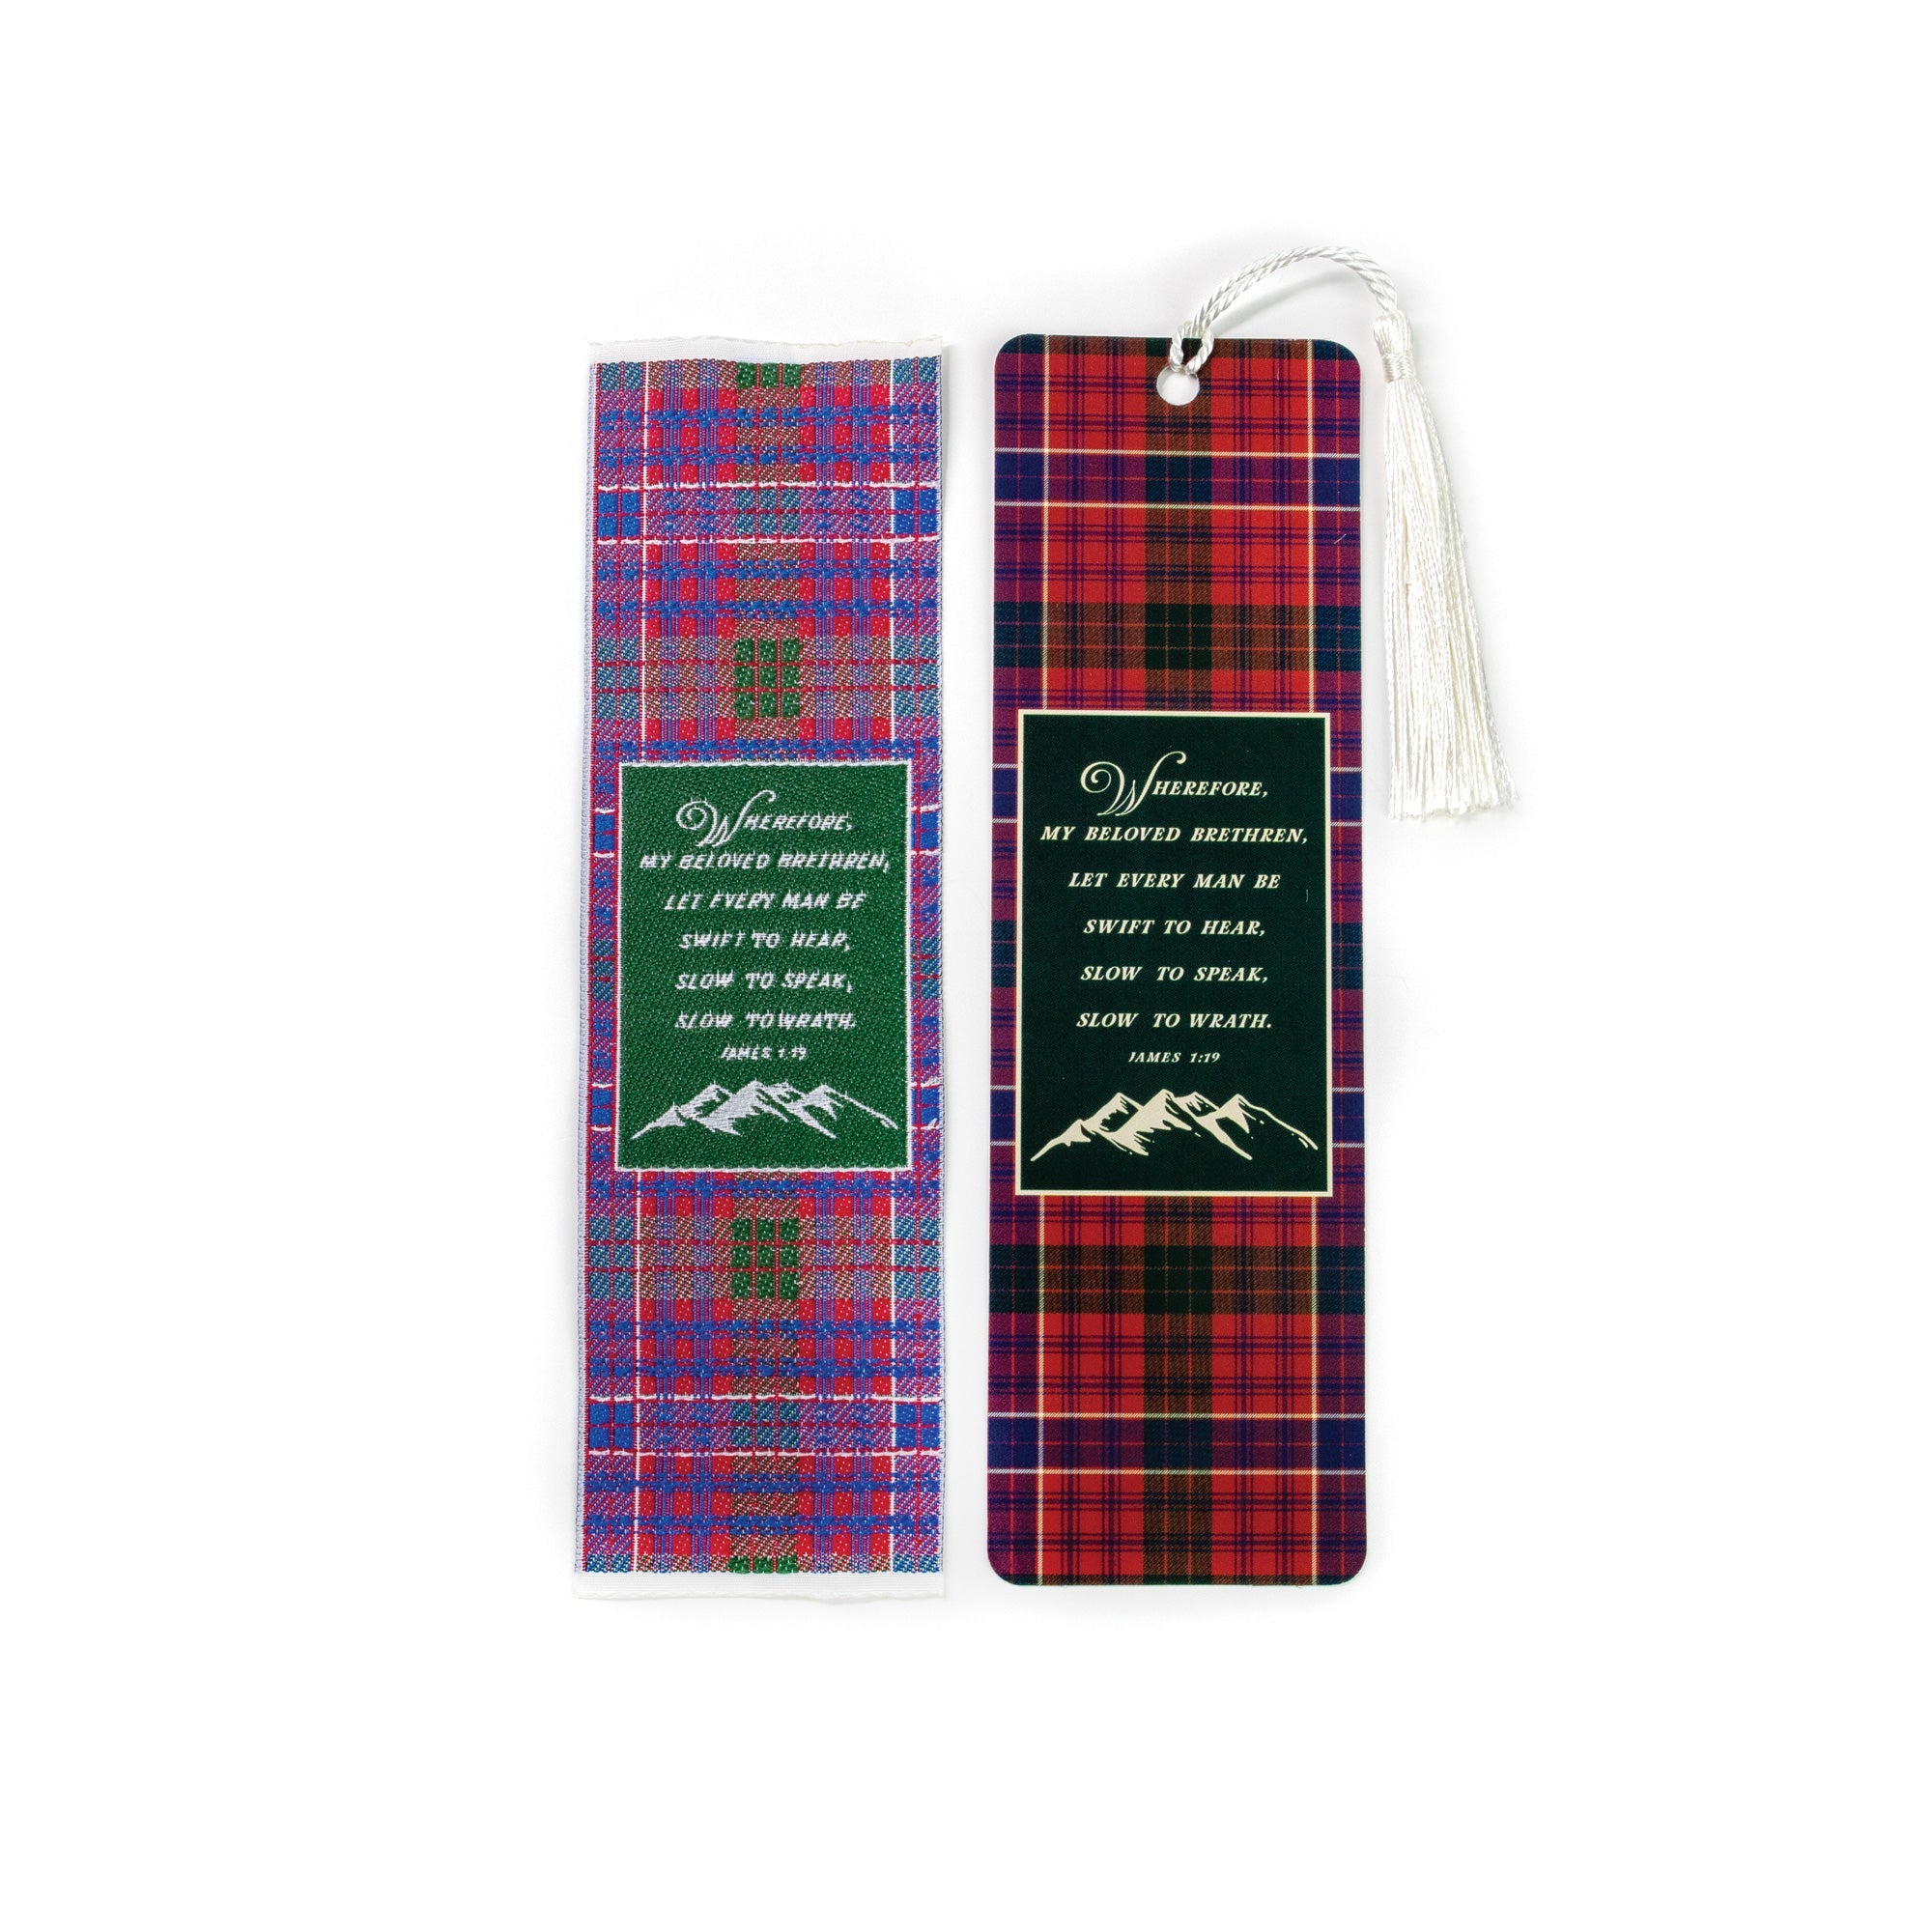 Let every man - James 1:19 Woven and Tasseled Bookmark Set